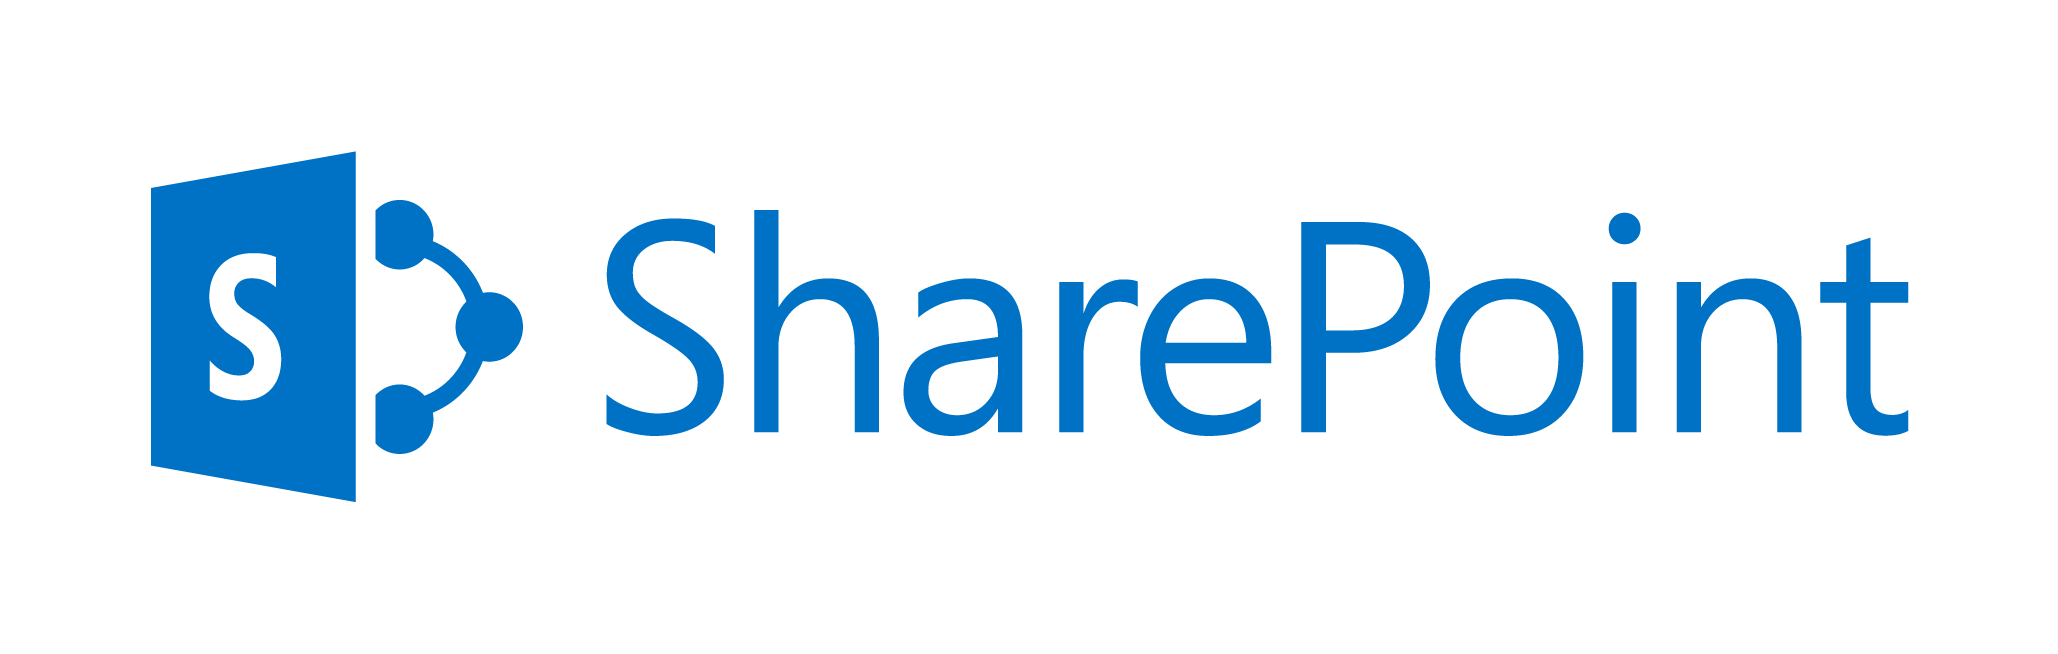 11 SharePoint Server Icon Images